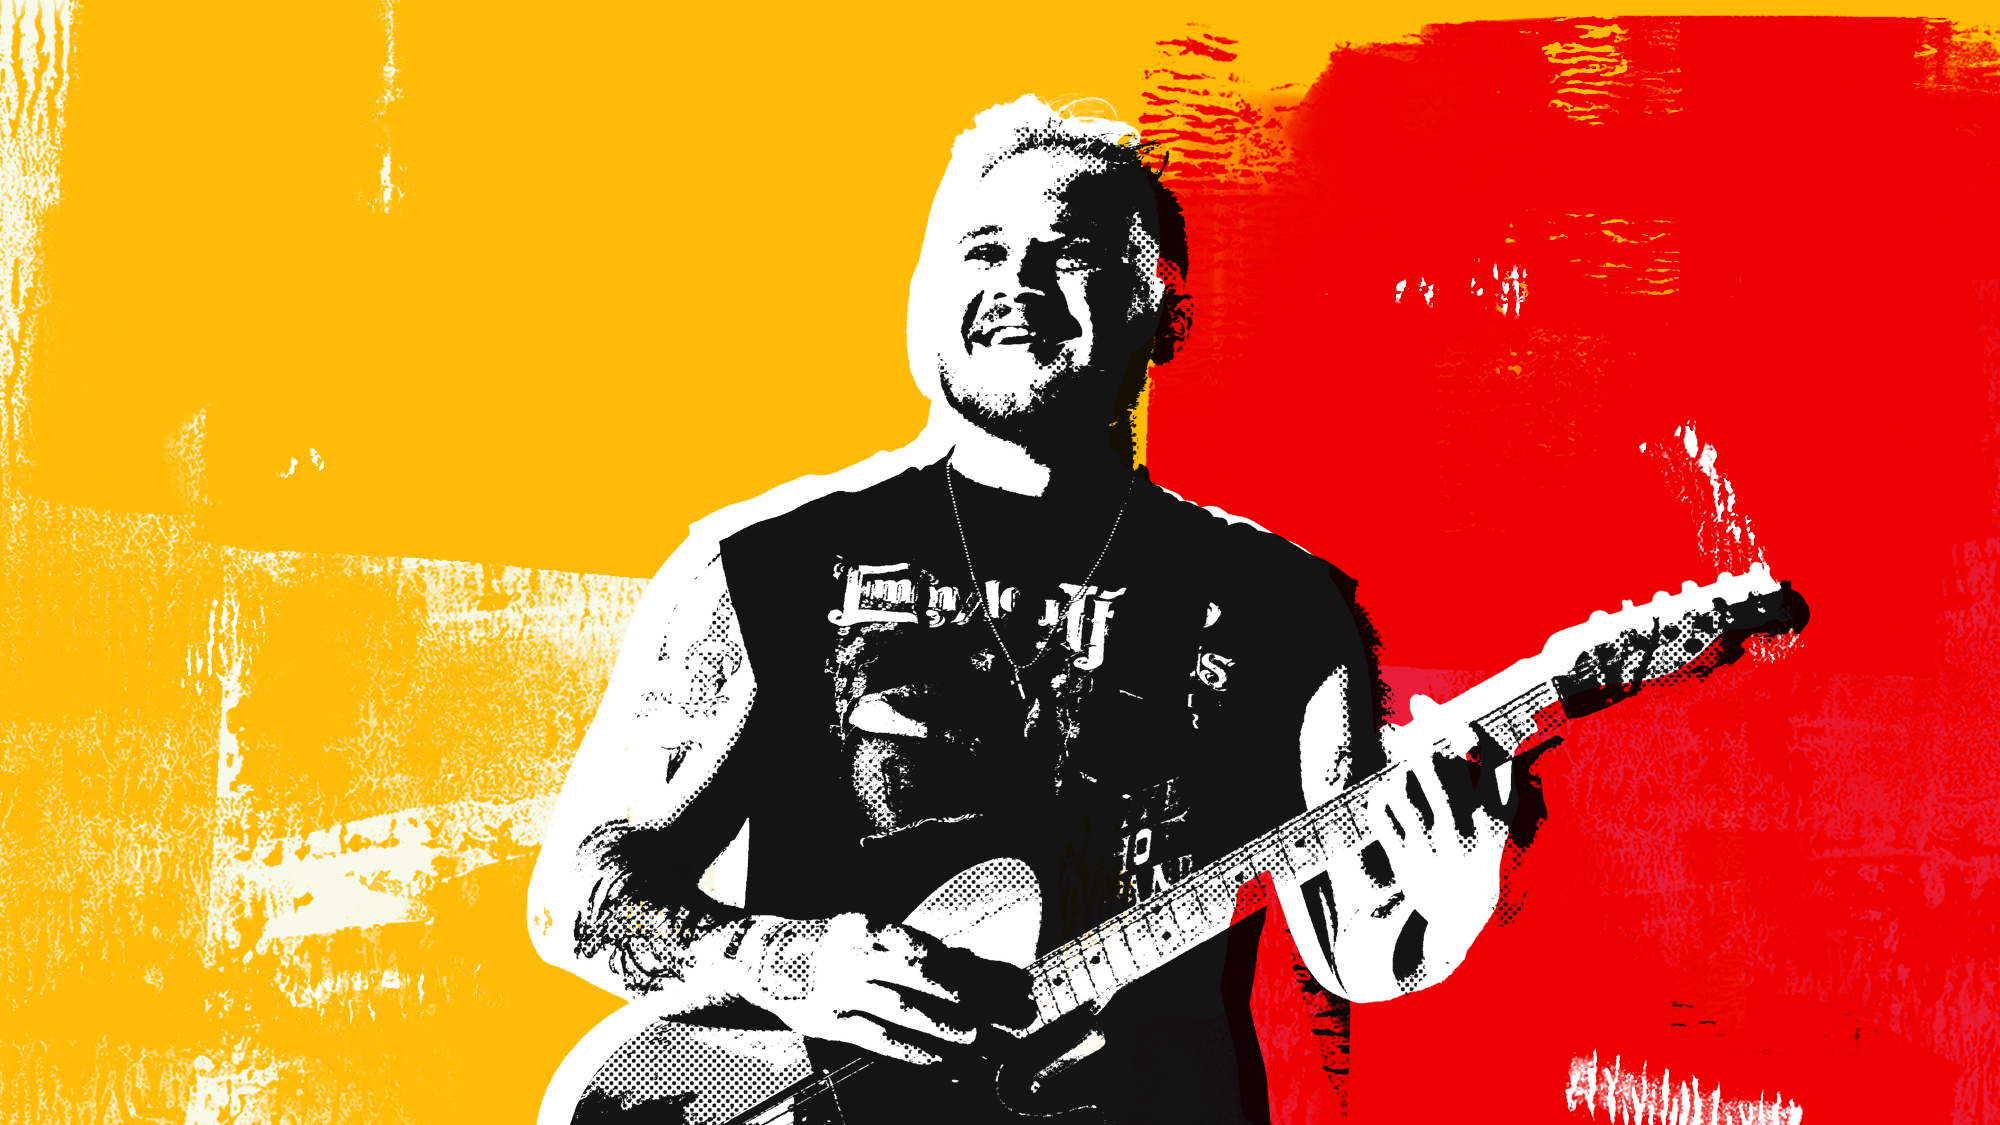 A photo-illustration of Zach Bryan smiling while playing the guitar